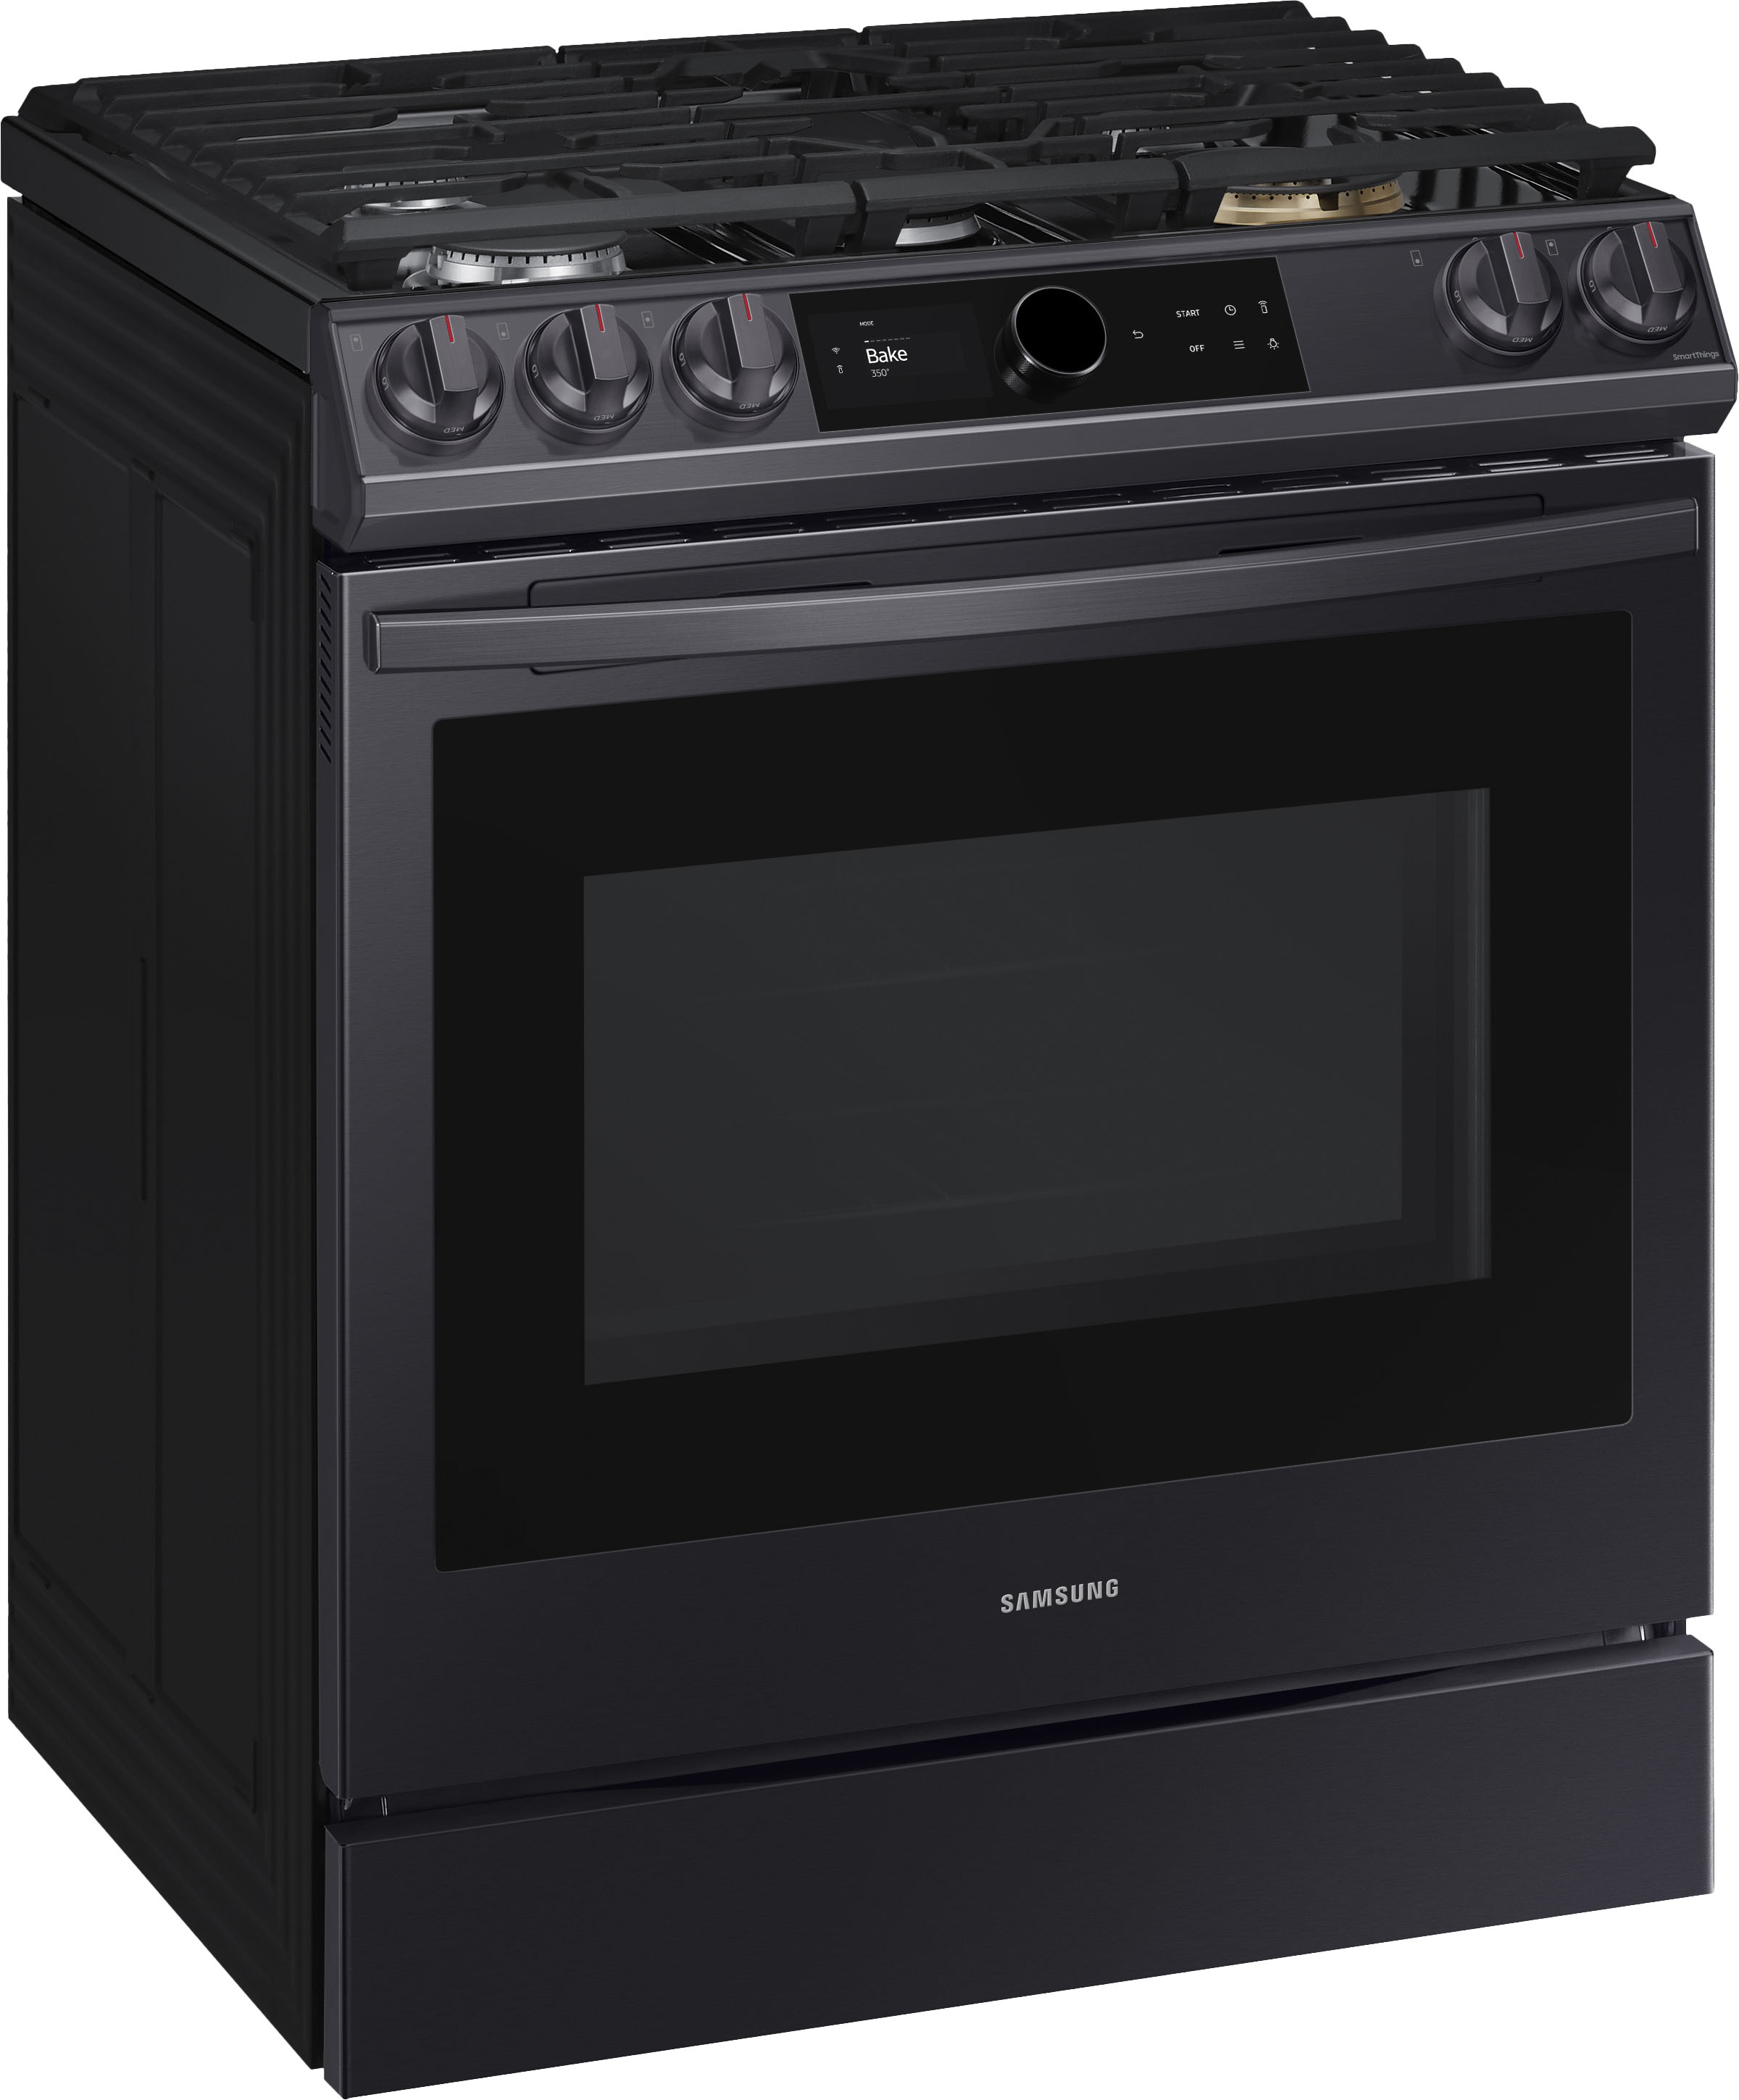 Angle View: Samsung - 6.0 Cu. Ft. Front Control Slide-in Gas Range with Smart Dial, Air Fry & Wi-Fi, Fingerprint Resistant - Black stainless steel